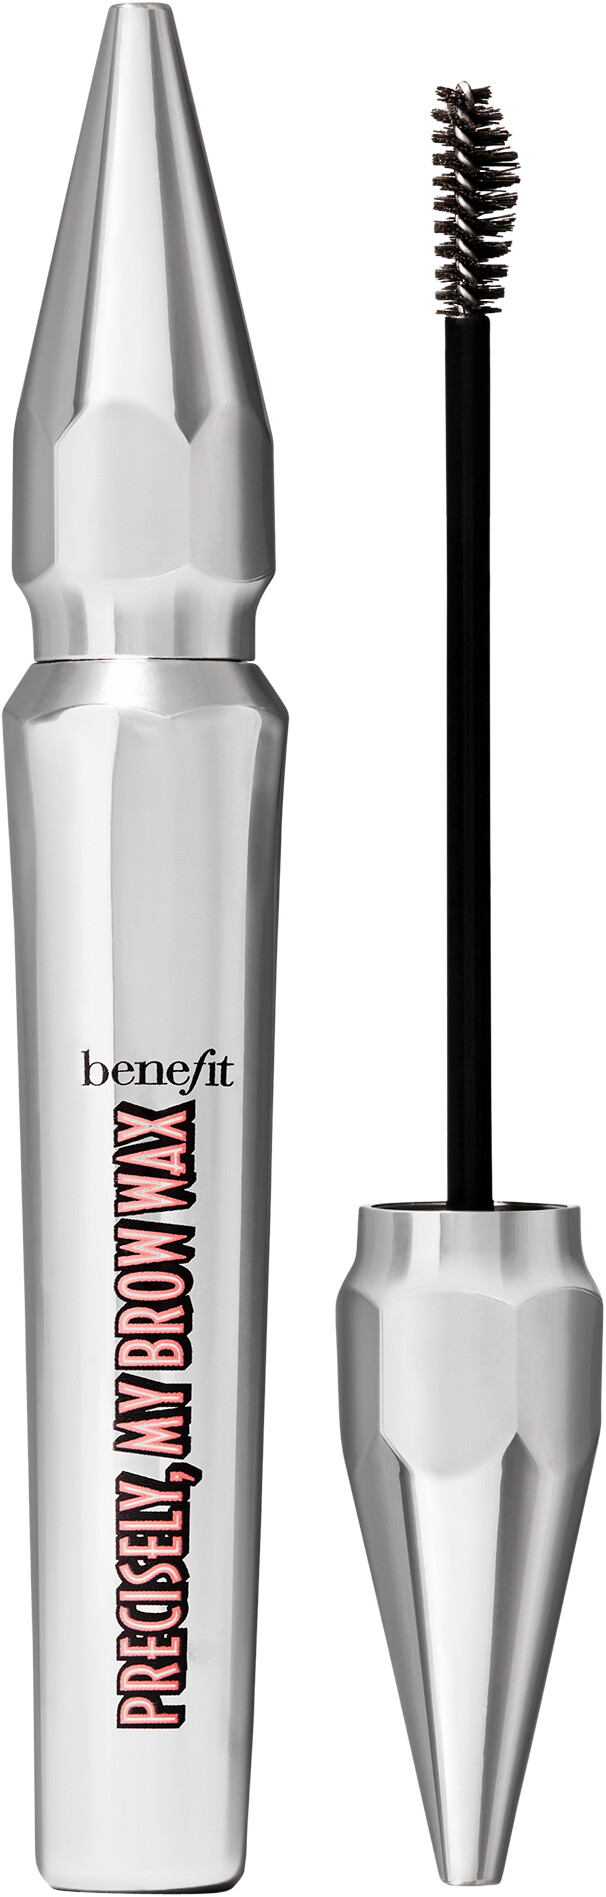 Benefit Precisely, My Brow Wax Full-Pigment Sculpting Brow Wax 5g 1 - Cool Light Blonde